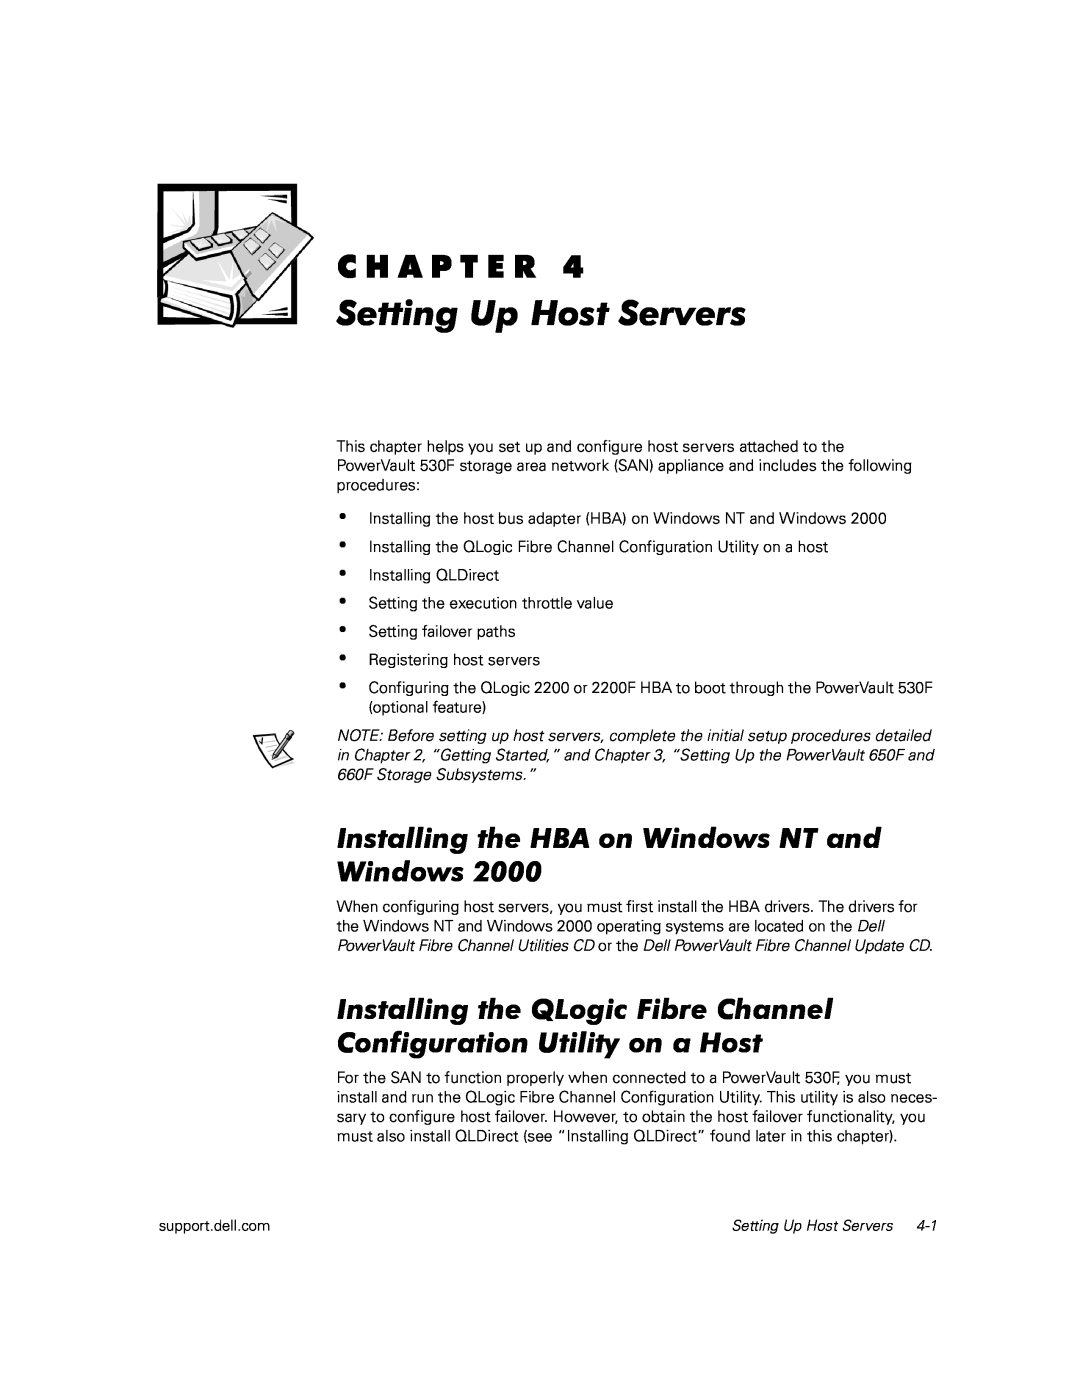 Dell 530F manual Installing the HBA on Windows NT and Windows, Setting Up Host Servers, C H A P T E R 